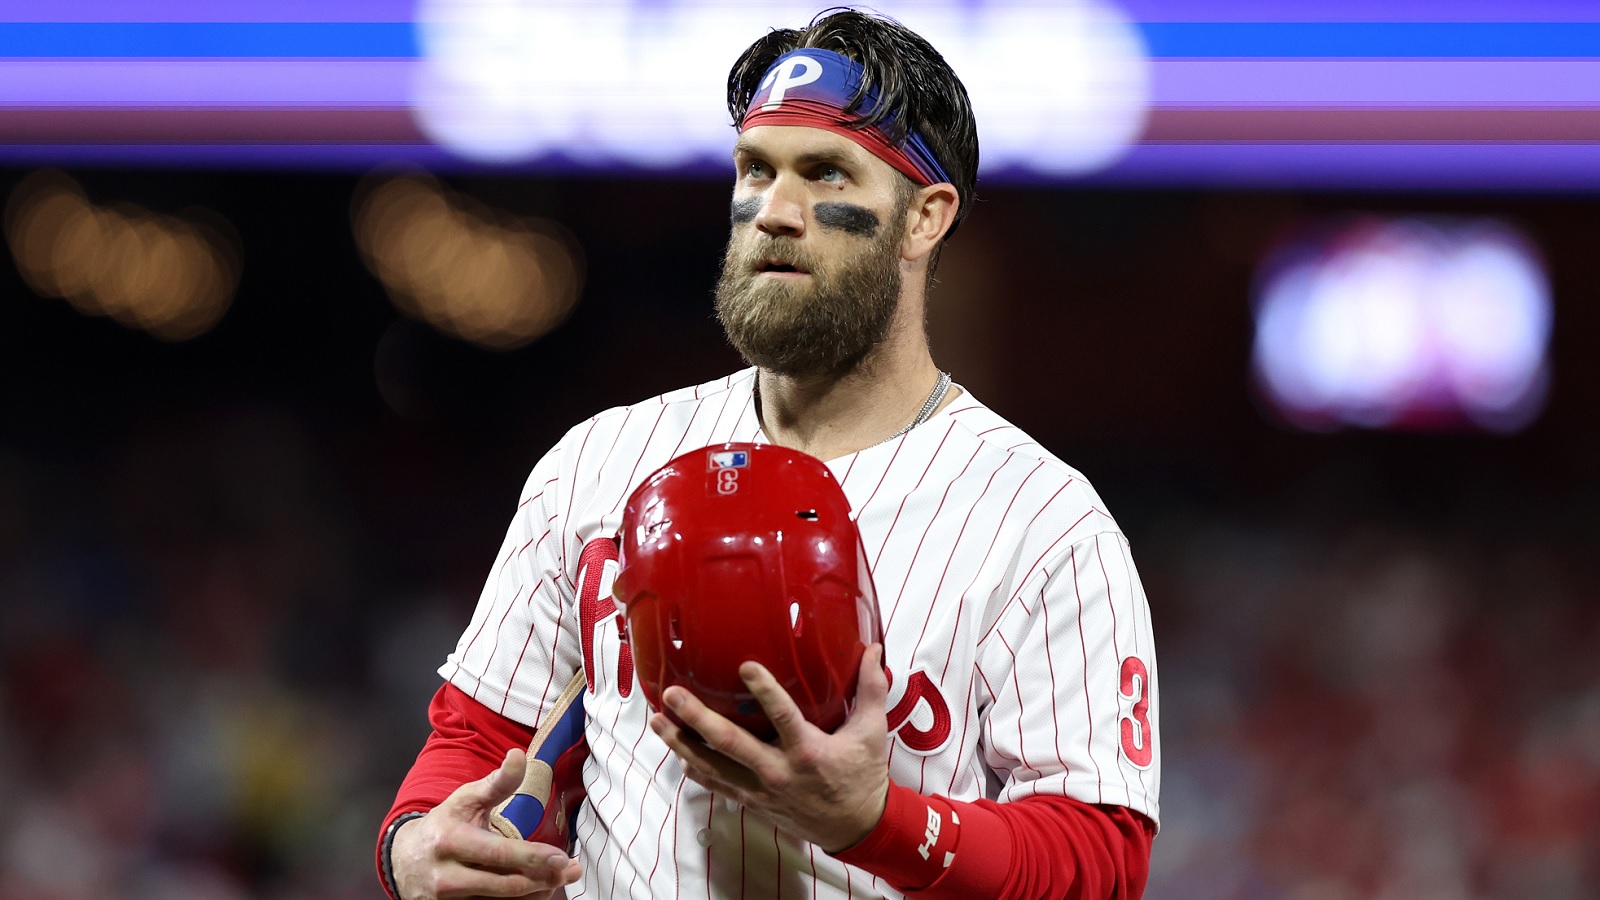 Phillies observations: Bryce Harper's brace vs. the pitch clock